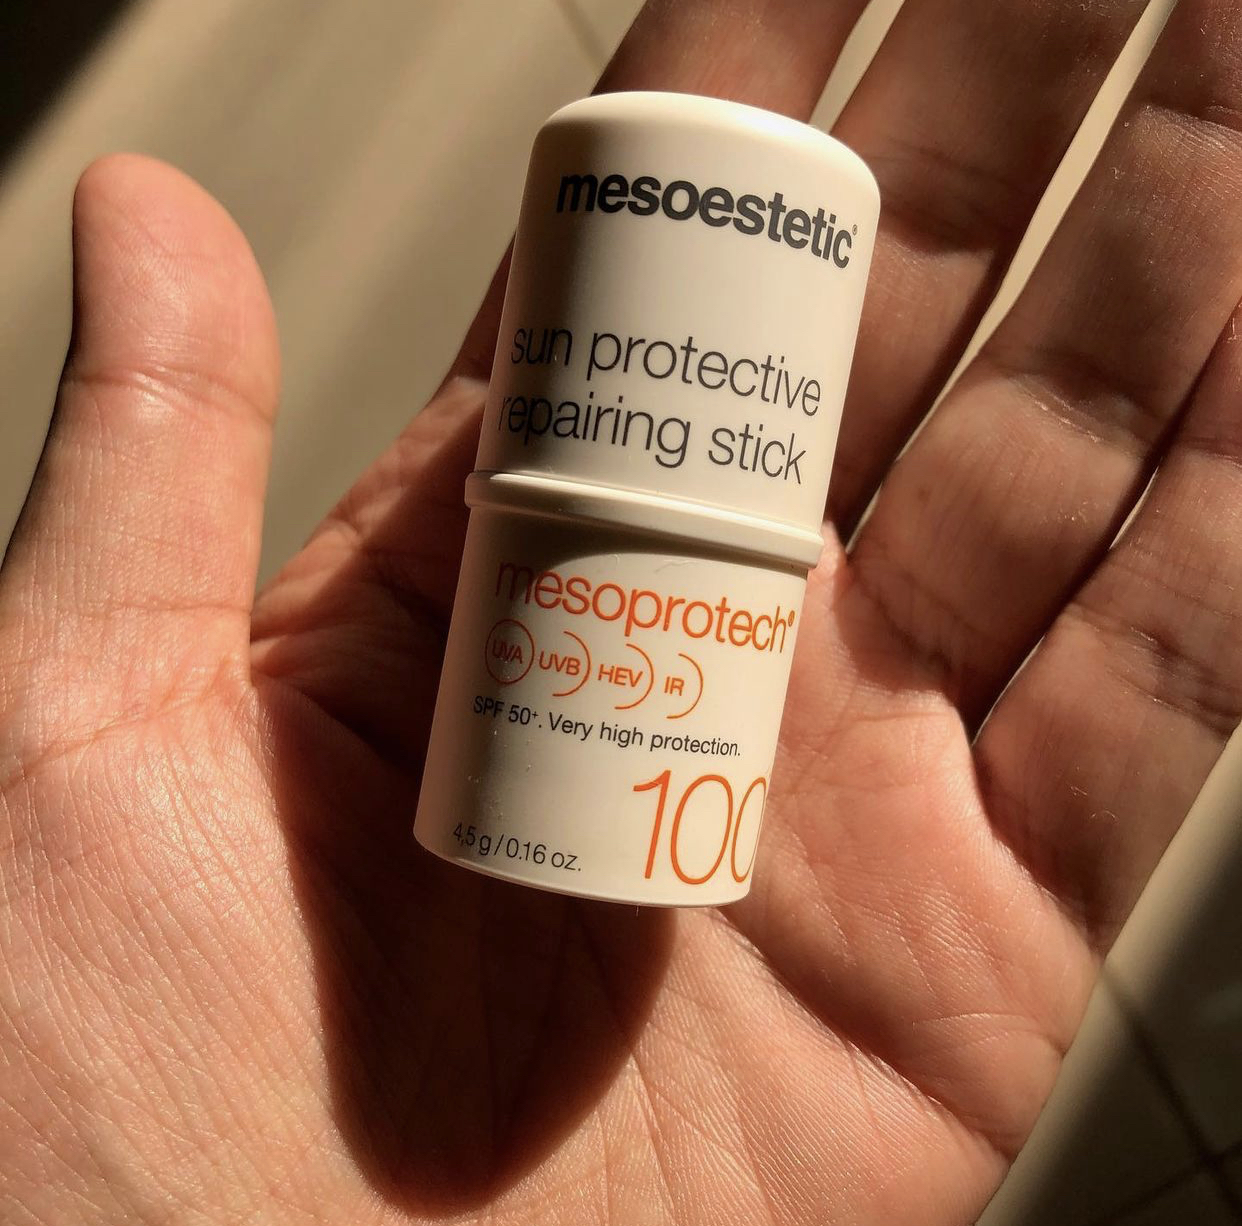 Product review: Mesoprotech sun protective repairing stick 100 + UVA/UVB/HEV/IR ⠀⁠